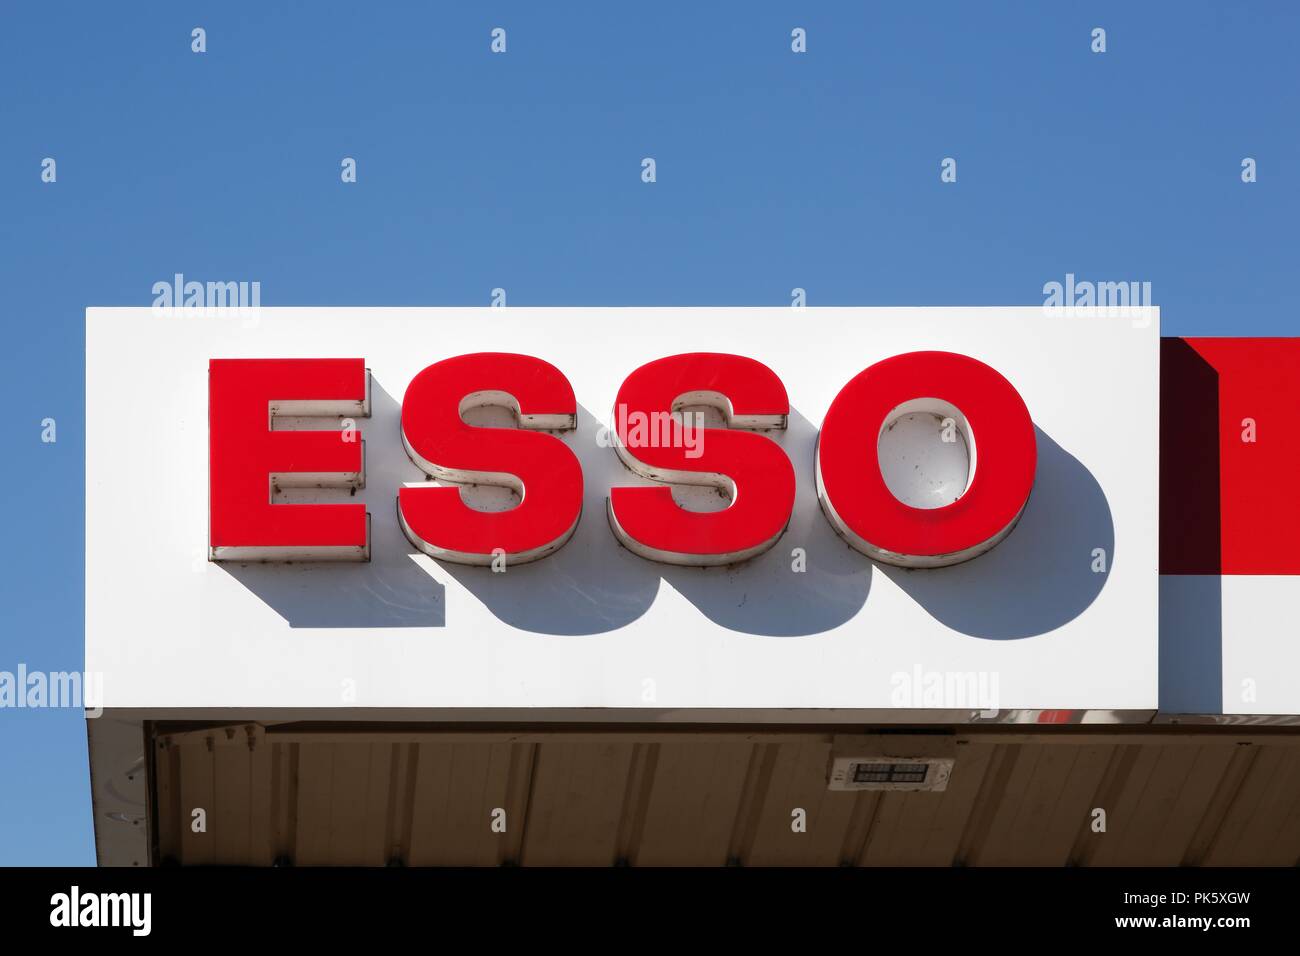 Mionnay, France - September 8, 2018: Esso logo on a gas station. Esso is an international trade name for ExxonMobil Stock Photo